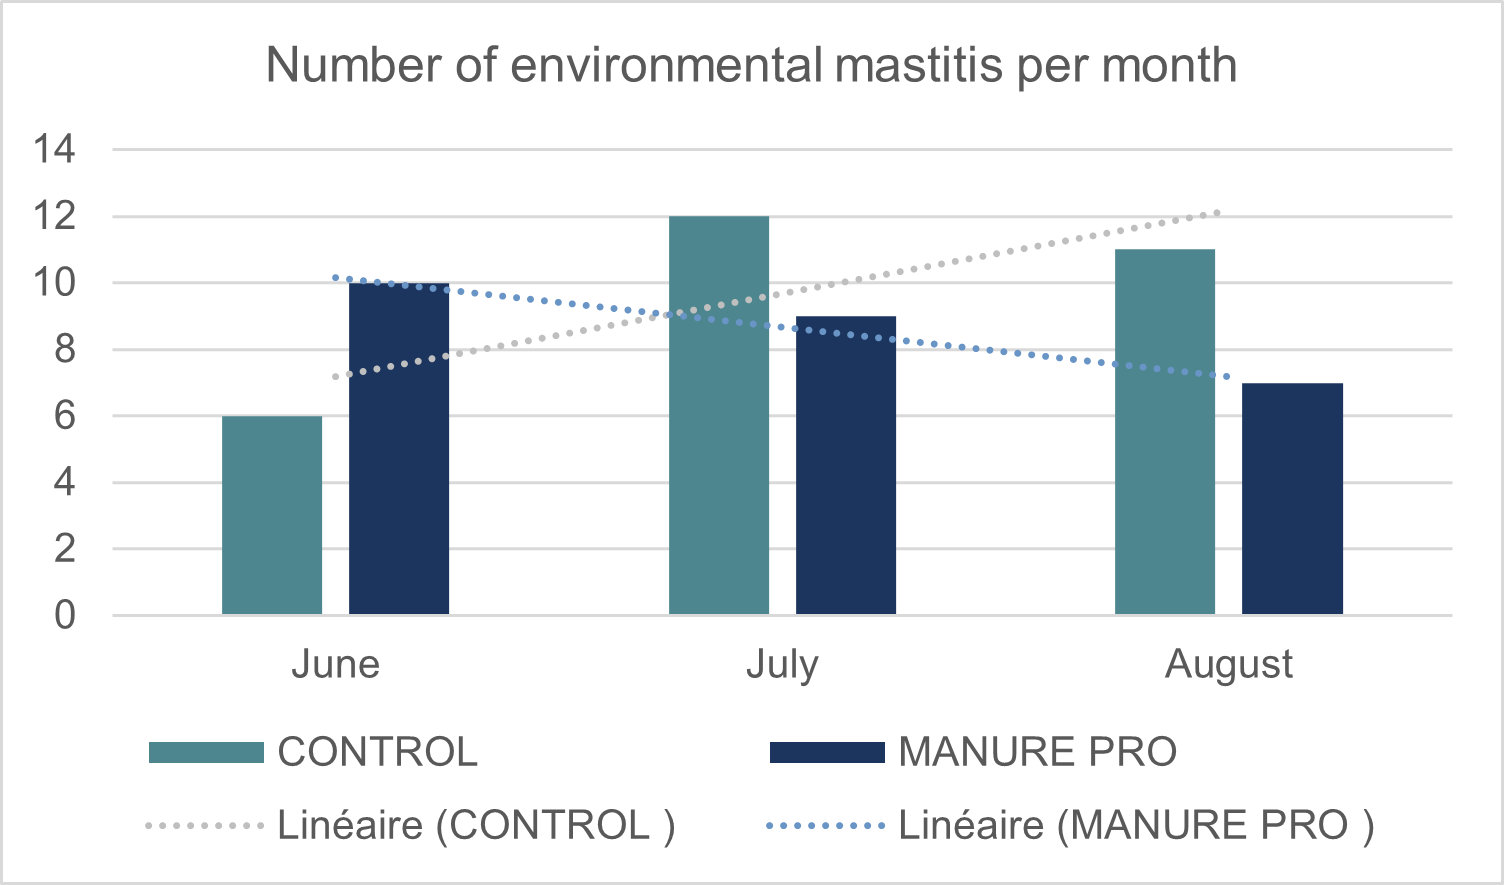 effect of MANURE PRO on the number of environmental mastitis per month, as evaluated by on-farm culture for main pathogens: E. coli, Klebsiella, Streptococcus uberis / Parauberis, Serratia monocytogenes.